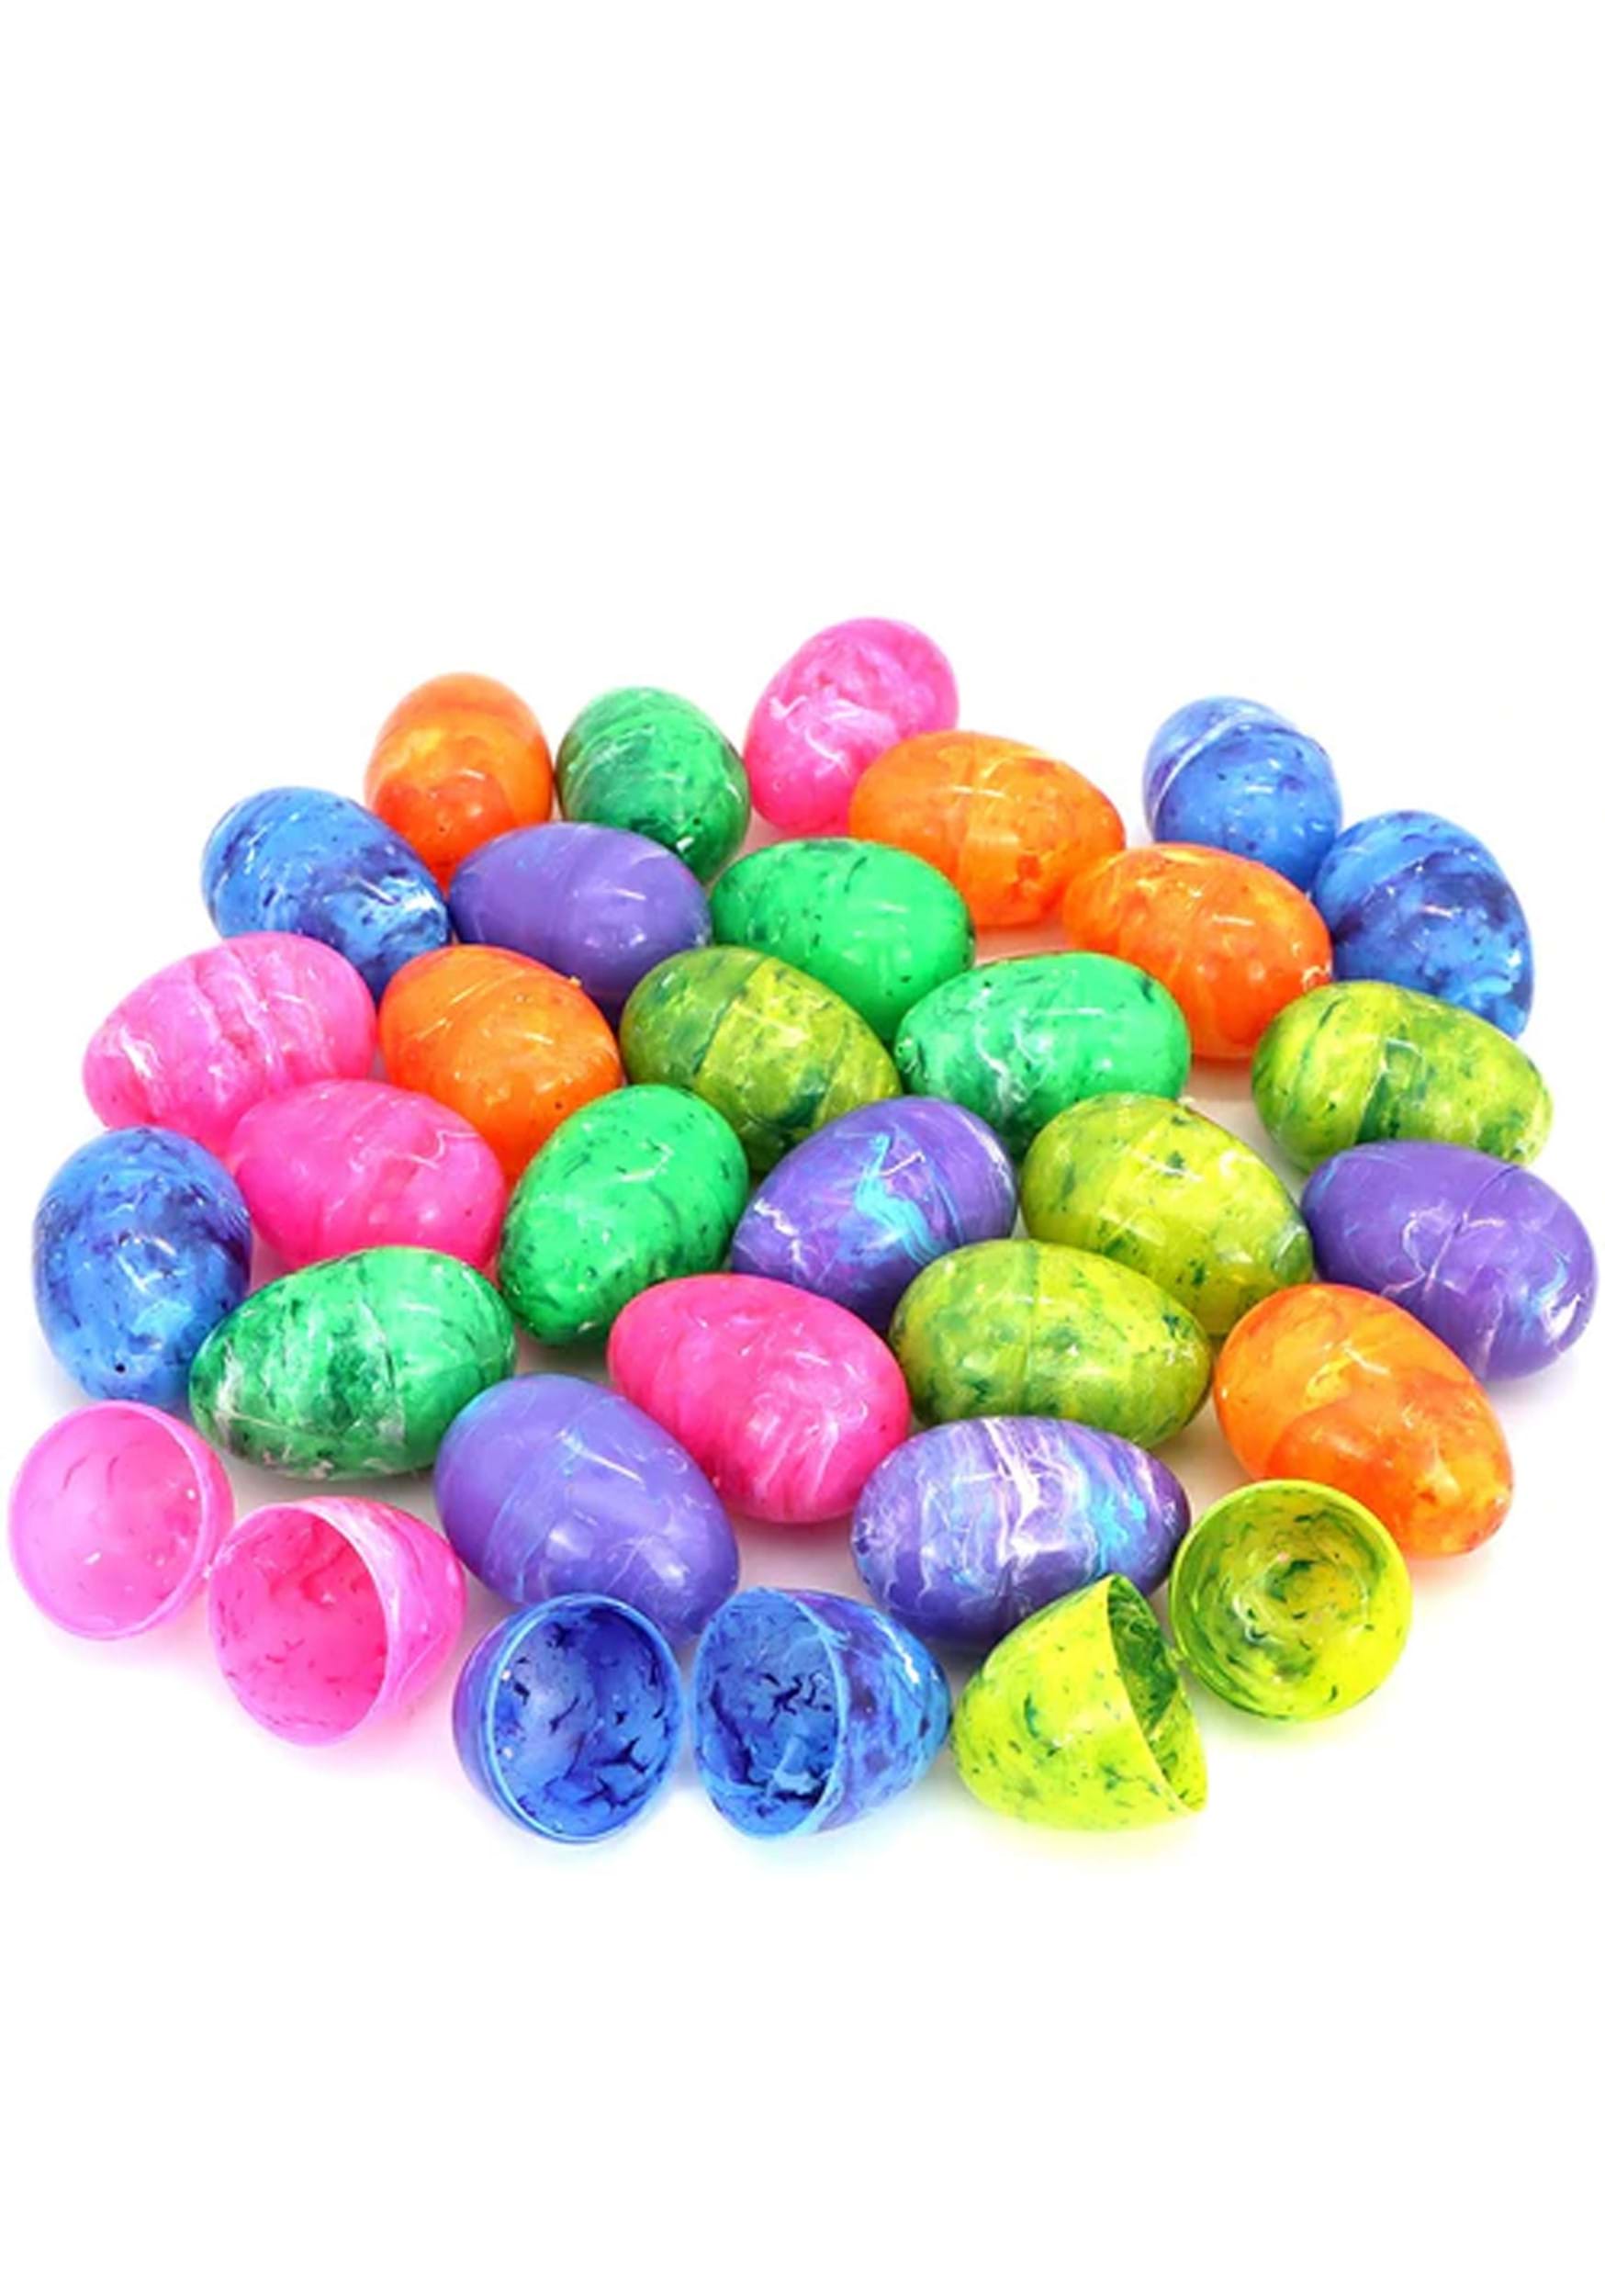 30 Piece 3.15 Inch Iridescent Egg Shells , Easter Gifts